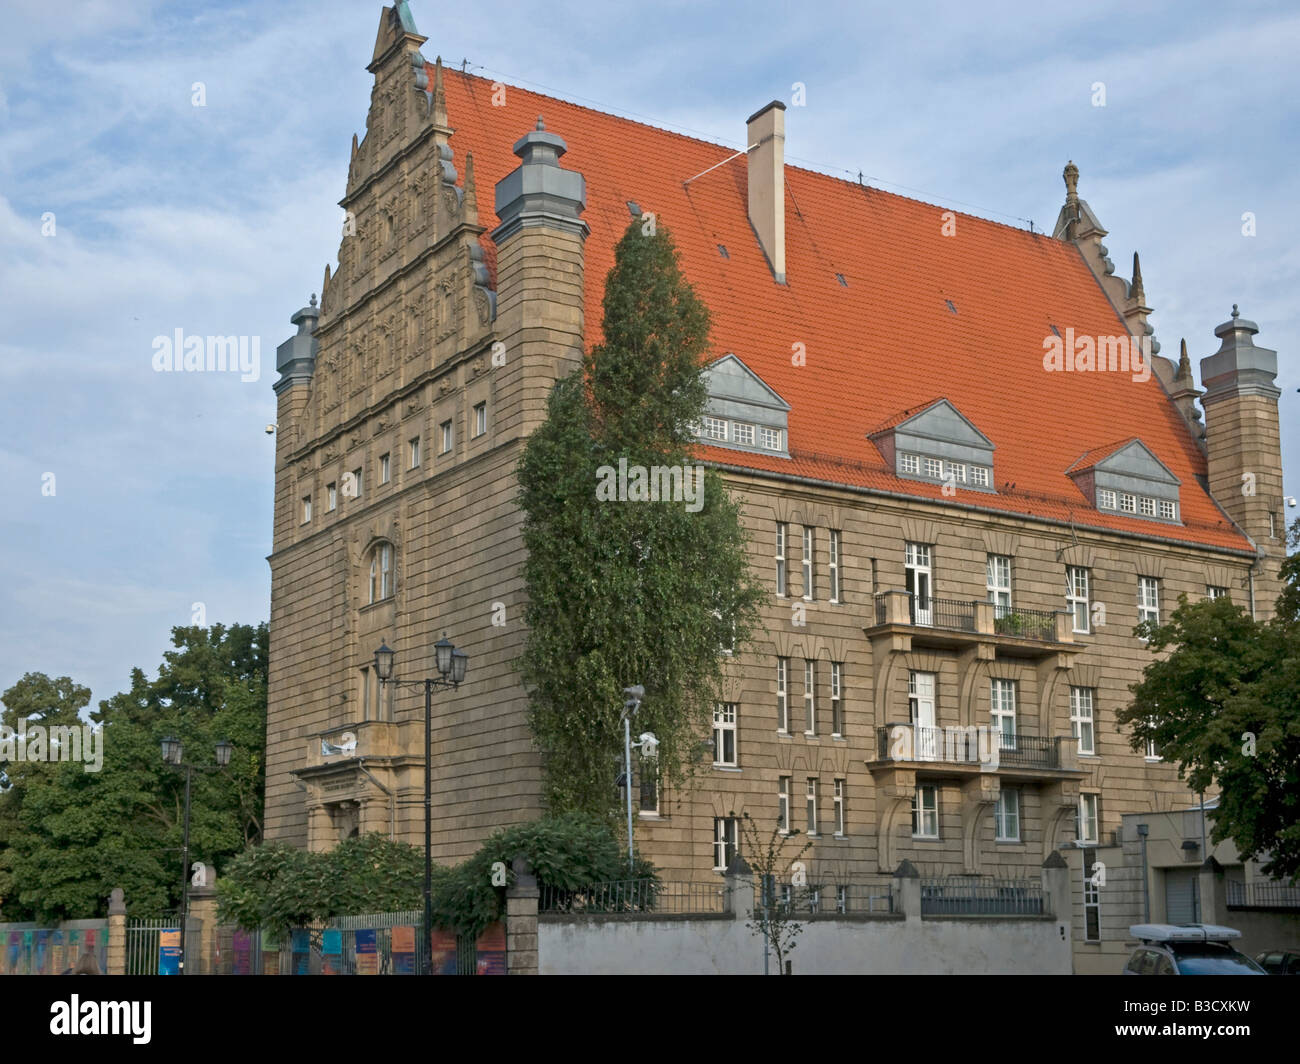 Nicolaus Copernicus university old house in in the old city Torun Poland Stock Photo